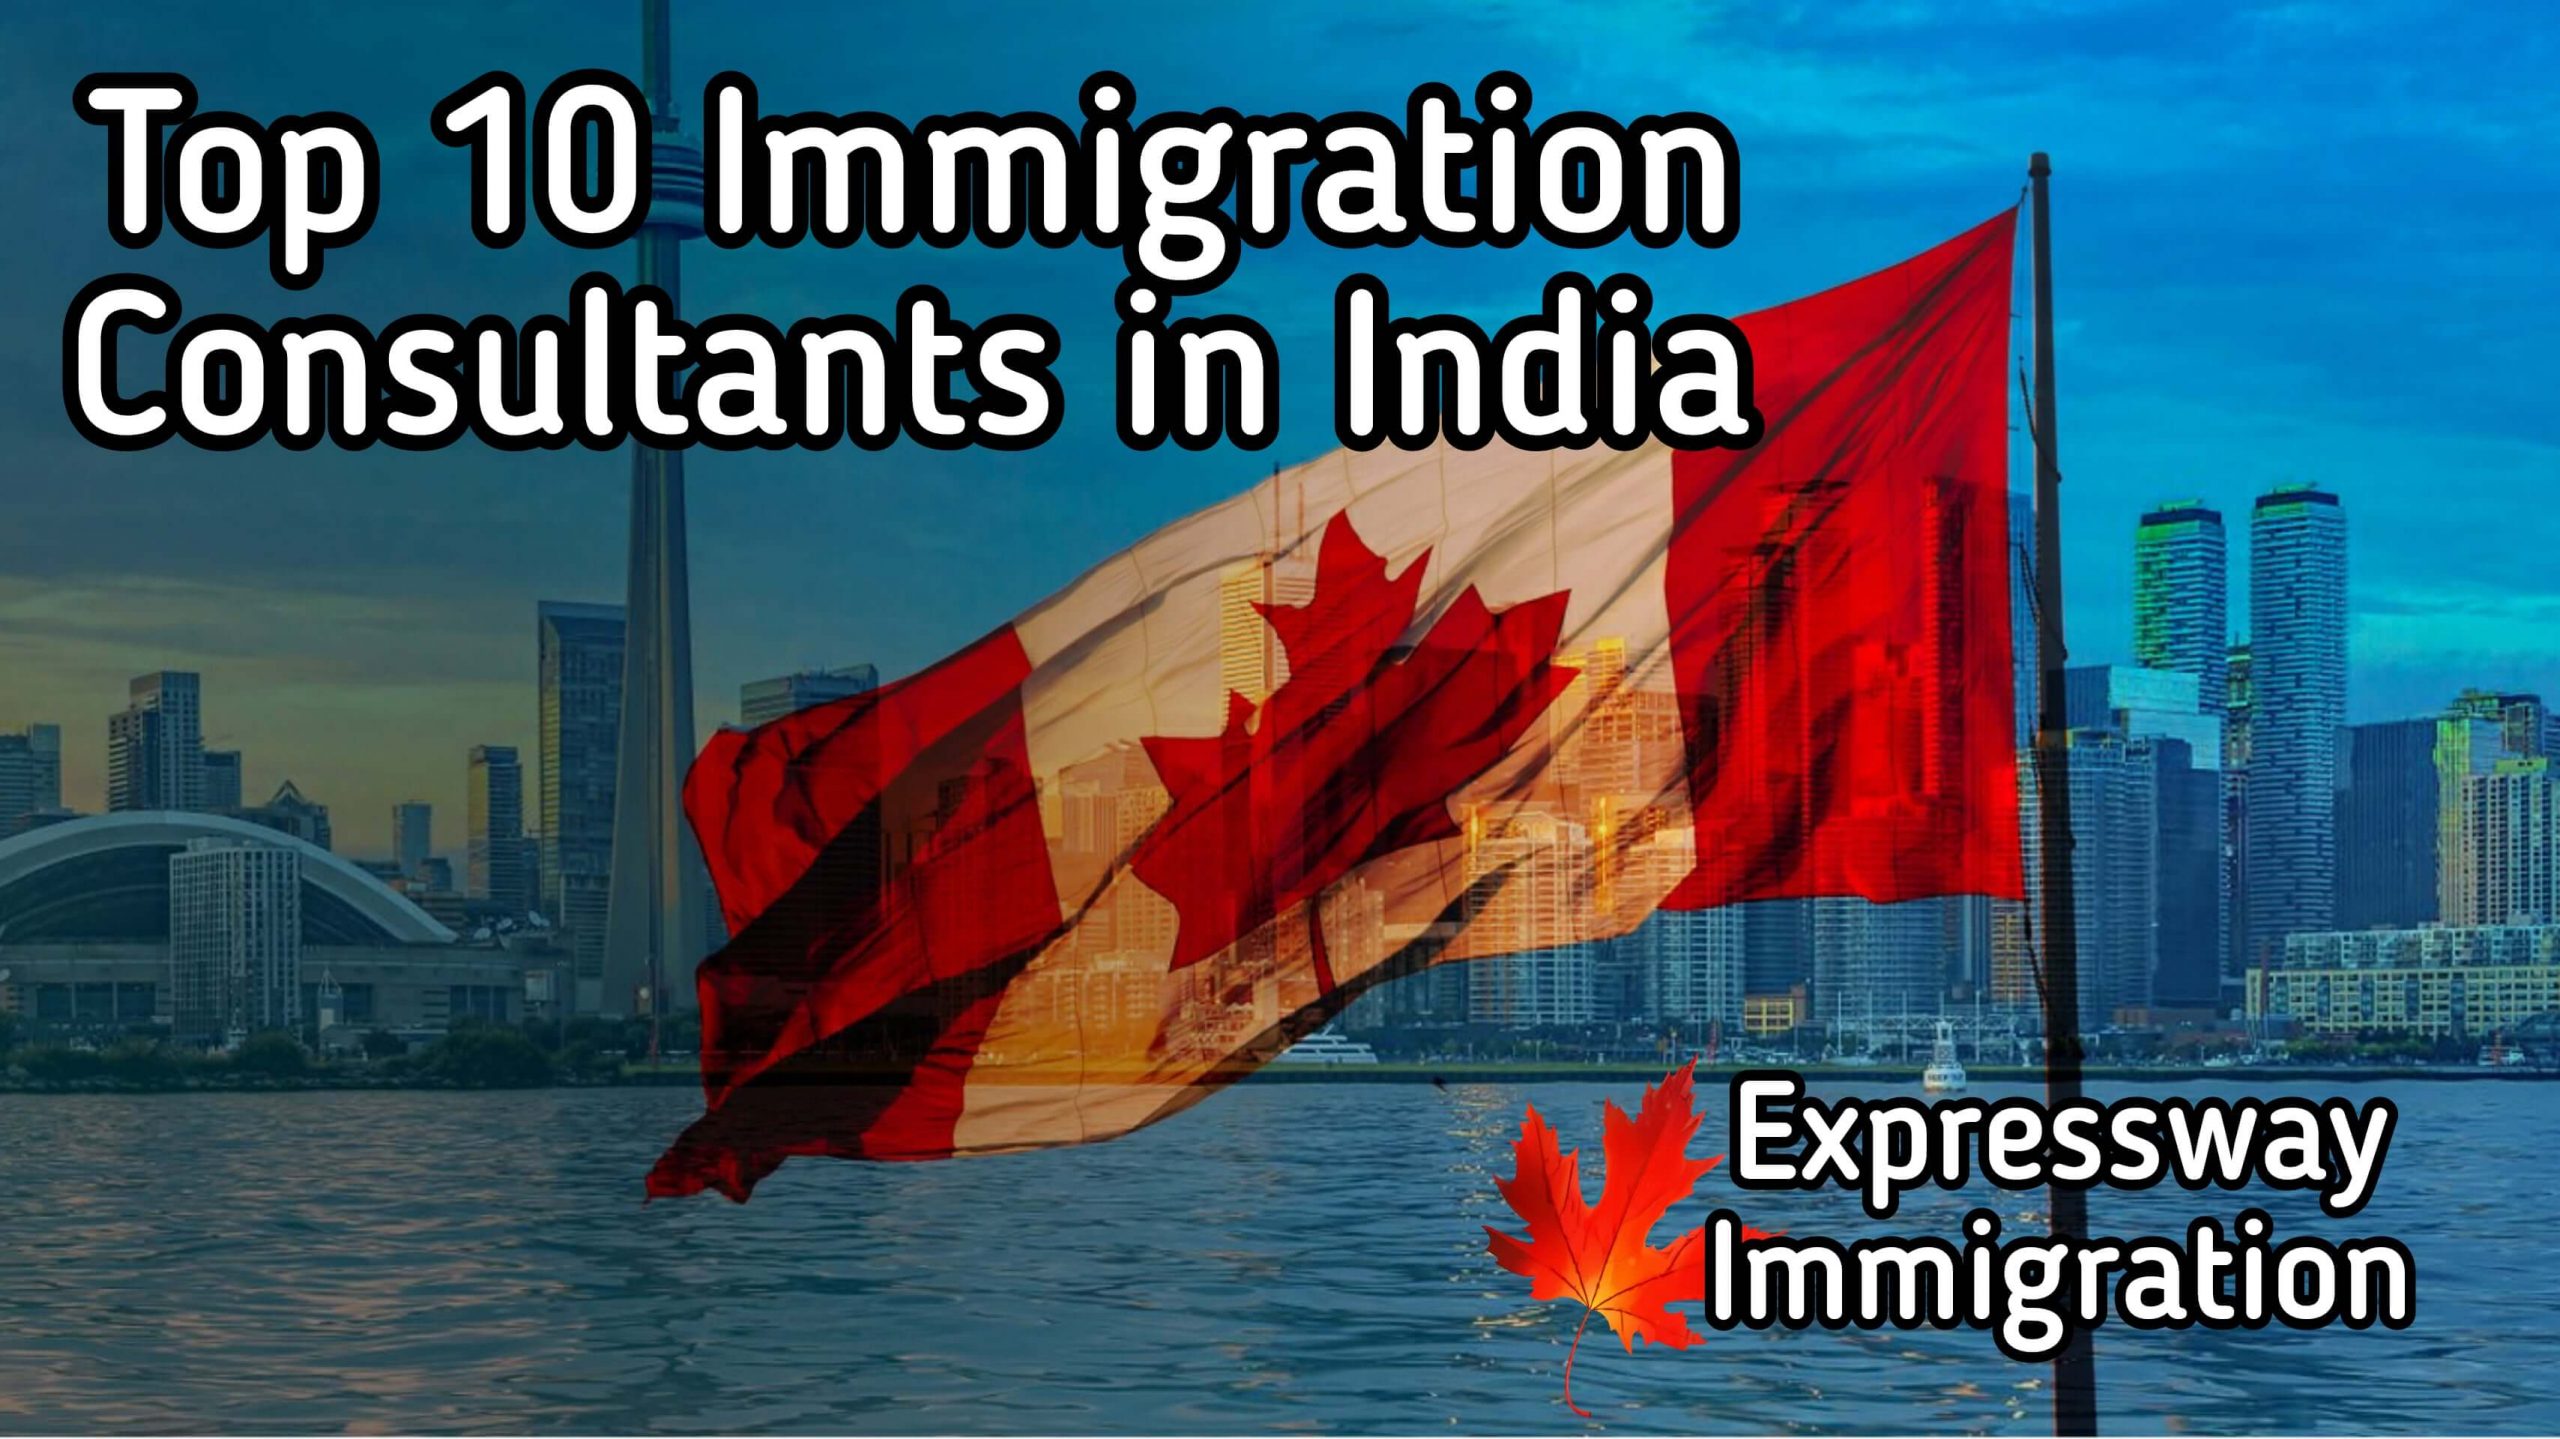 Top 10 Immigration Consultants in India